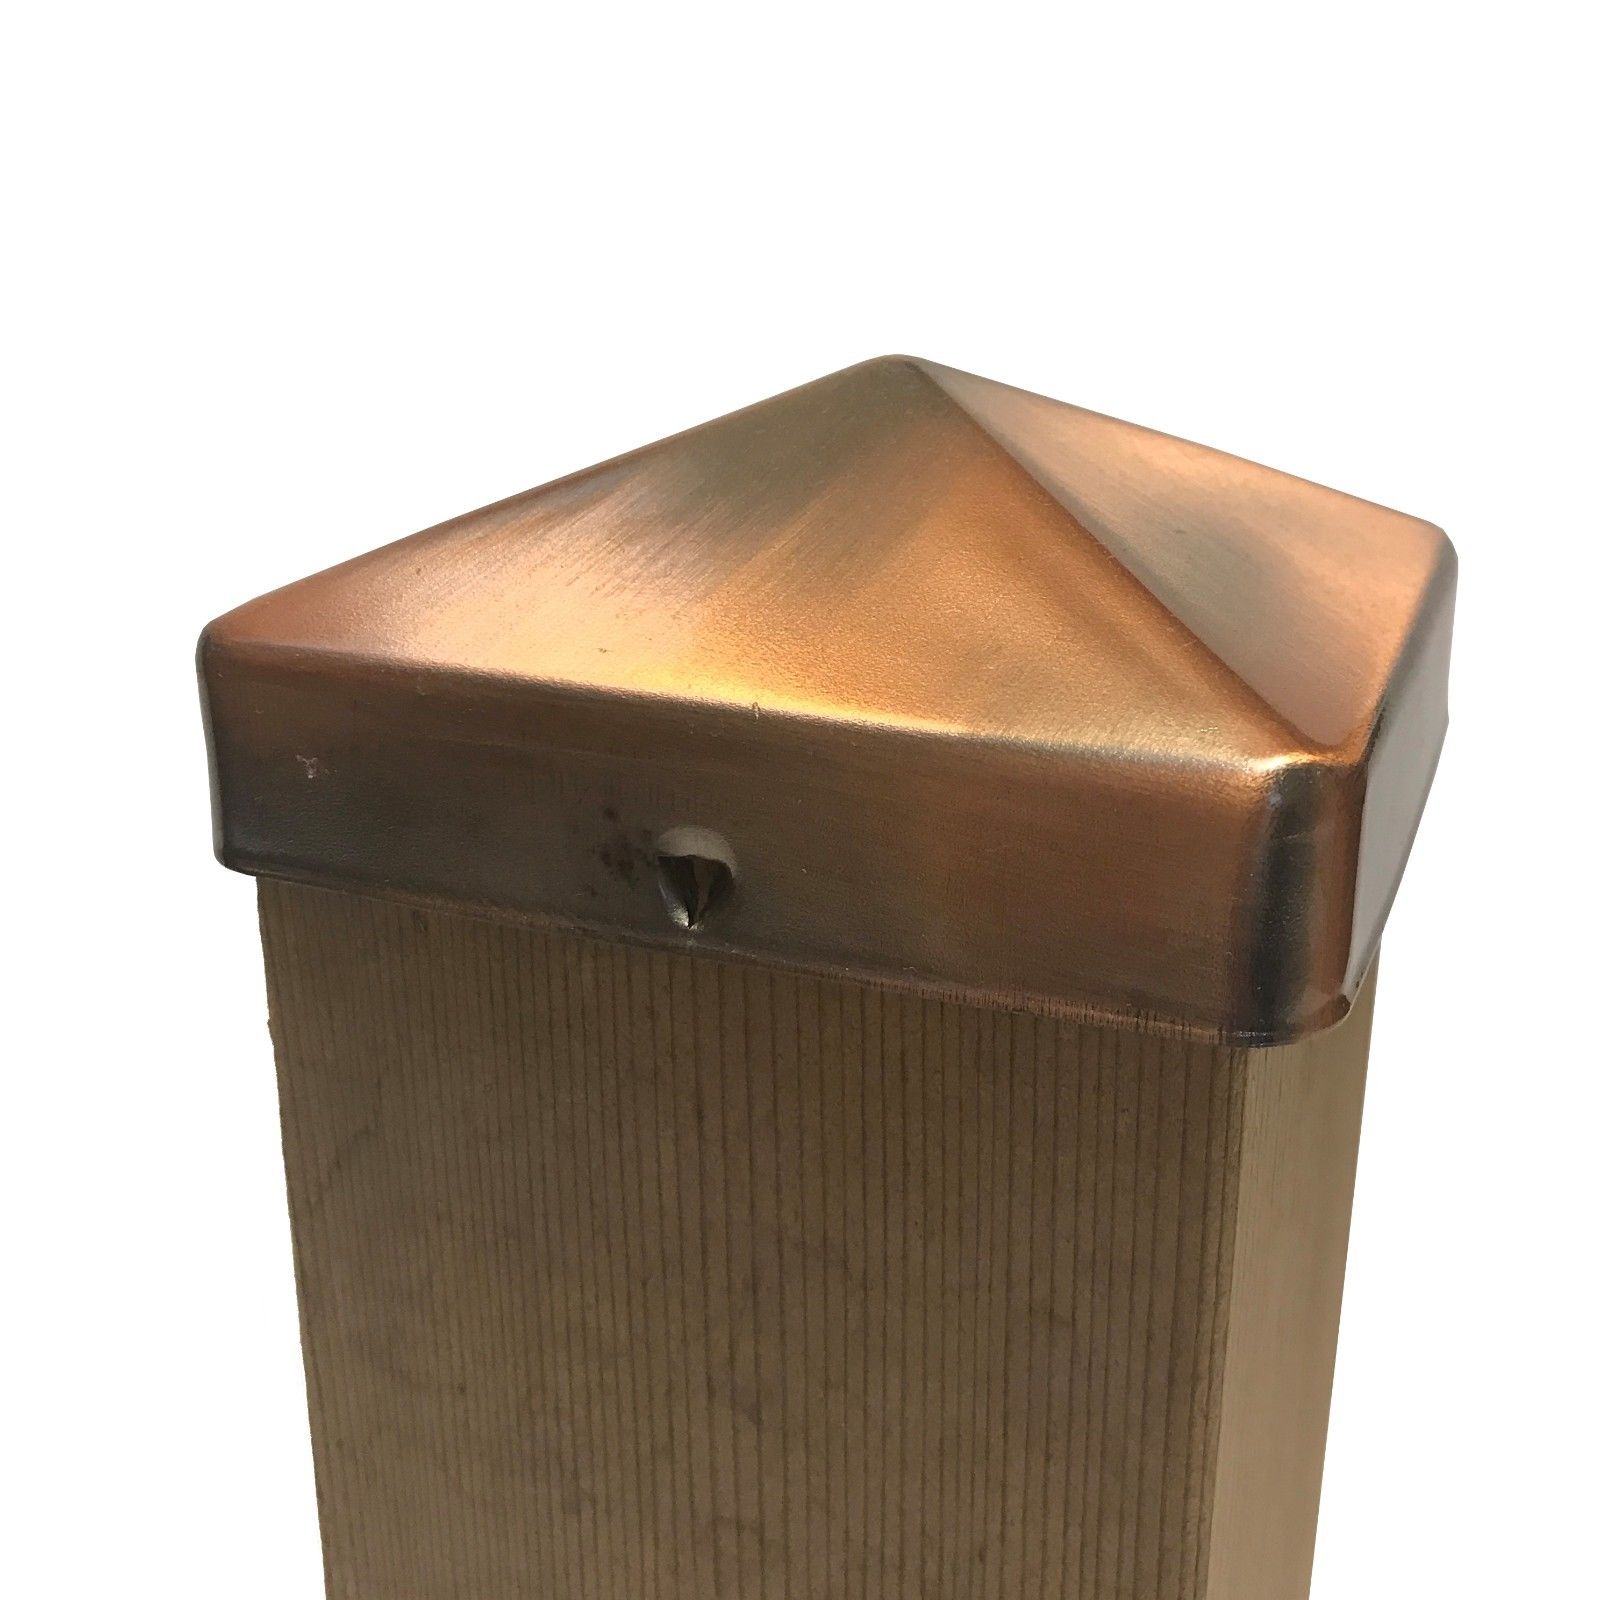 Pressure Fit Nuvo Iron US Eazy Cap for 3.5" x 3.5" Posts Copper Plated 